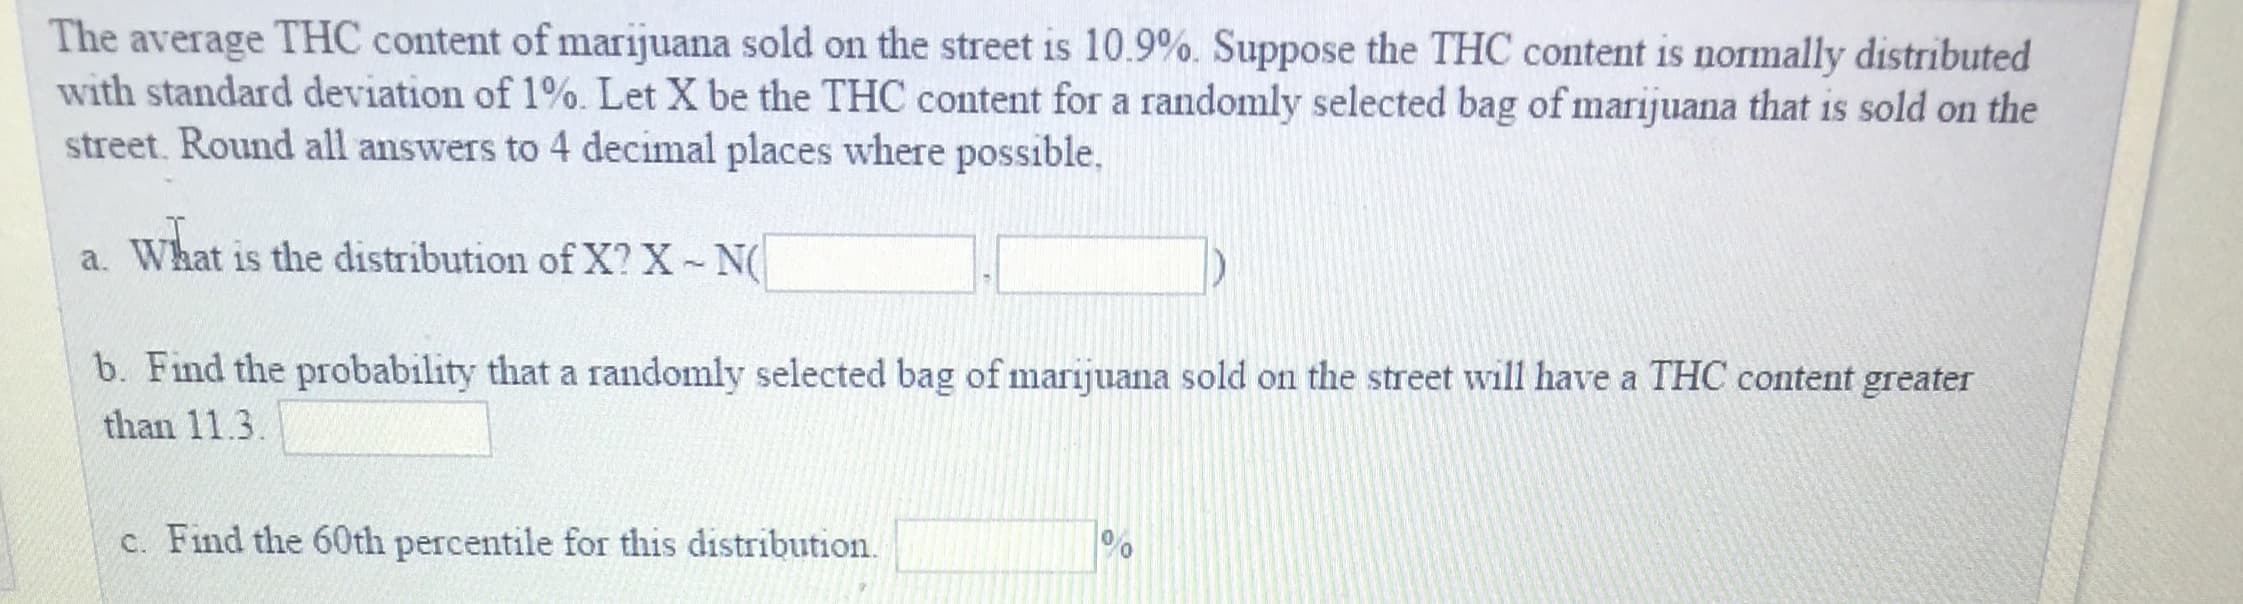 The average THC content of marijuana sold on the street is 10.9%, Suppose the THC content is normally distributed
with standard deviation of 1%, Let X be the THC content for a randomly selected bag ofmarijuana that is sold on the
street. Round all answers to 4 decimal places where possible.
a. What is the distribution of X? X N
b. Find the probability that a randomly selected bag of marijuana sold on the street will have a THC content greater
than 11.3
c. Find the 60th percentile for this distribution.
